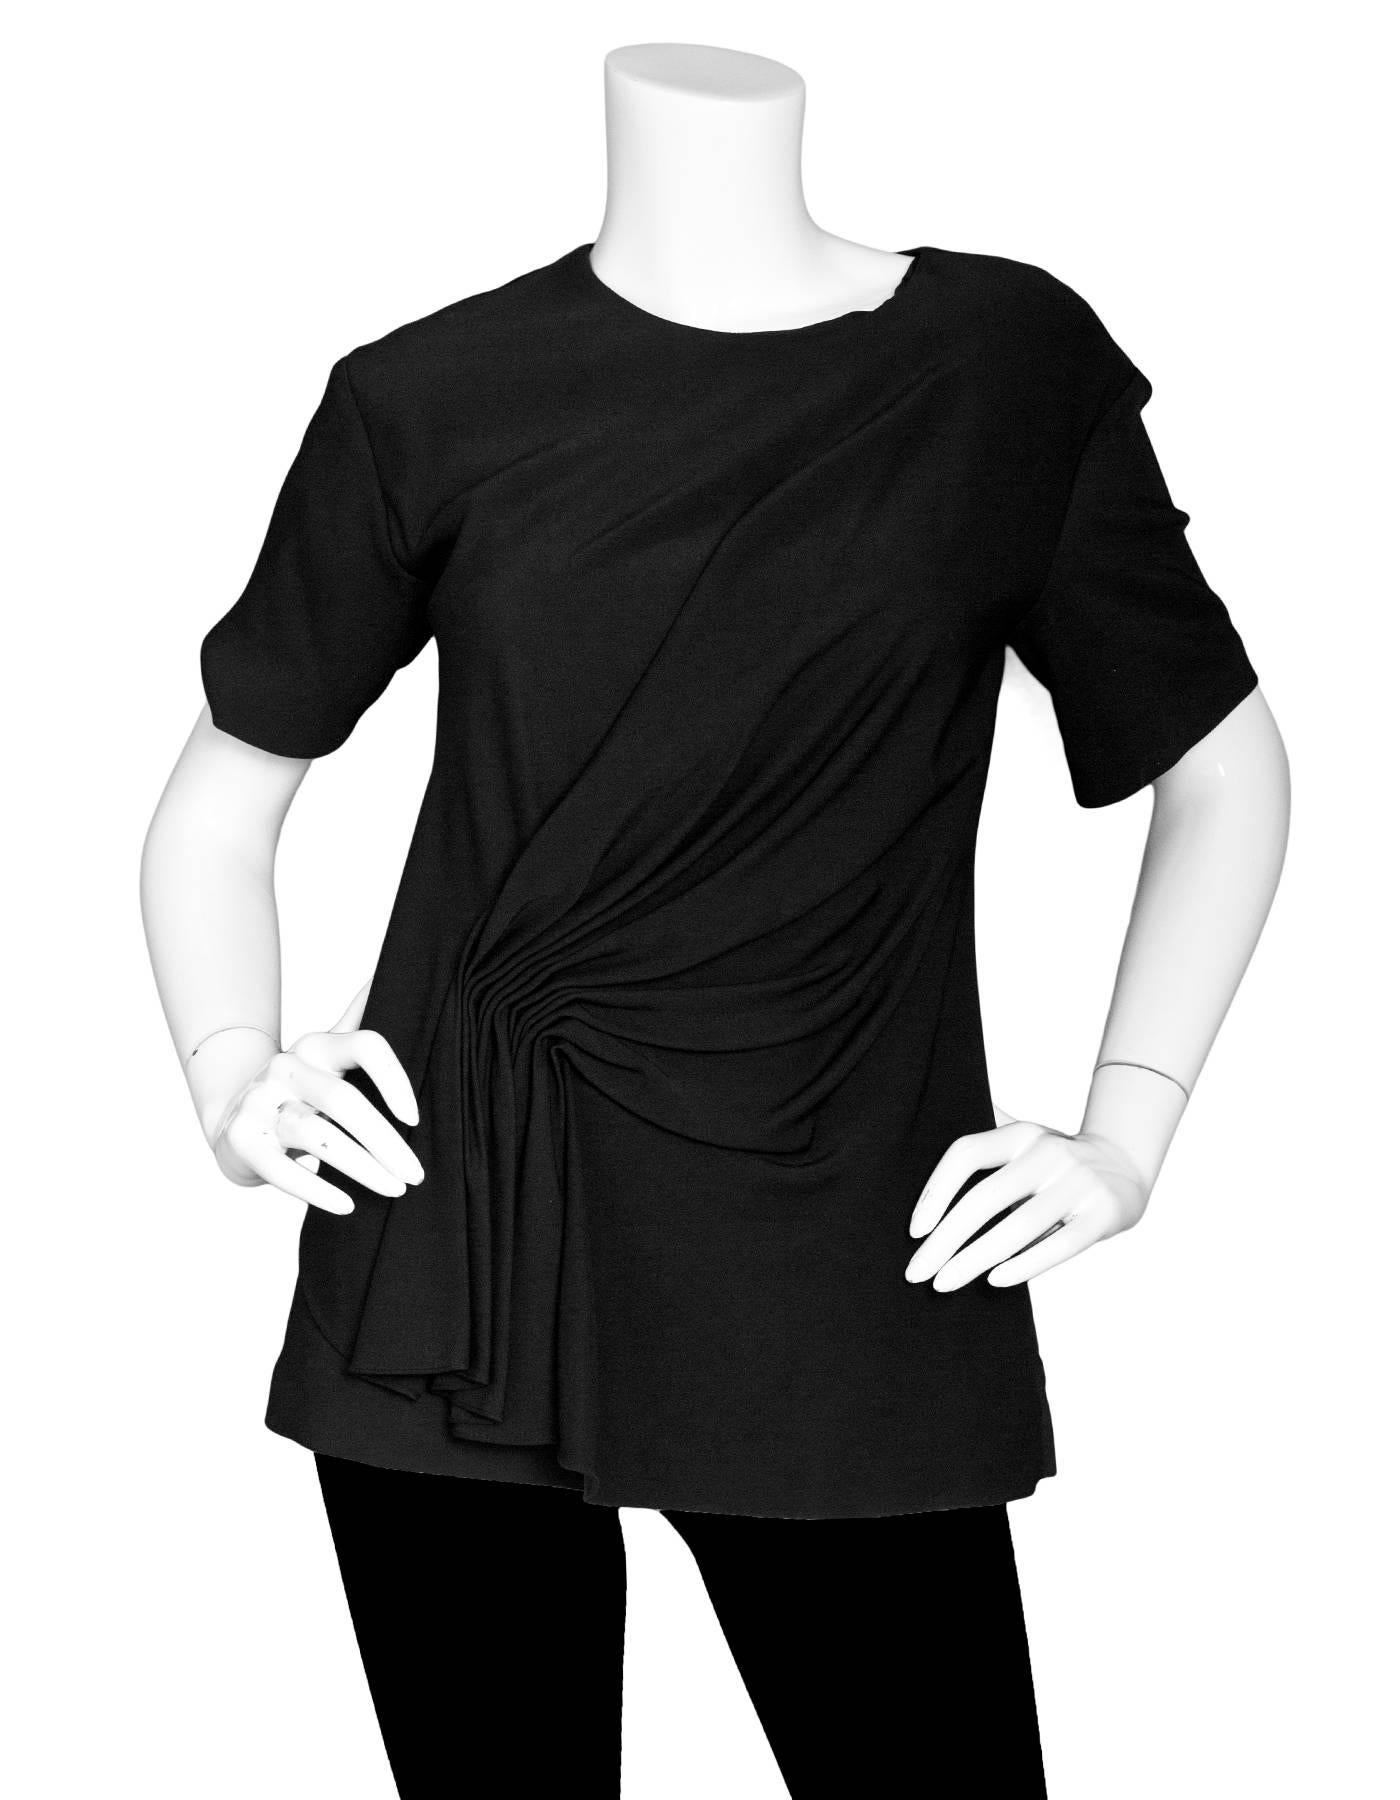 Alexander Wang Black Short Sleeve Top Sz 2

Made In: China
Color: Black
Composition: 97% viscose, 3% elastane
Lining: Black 85% polyester, 15% spandex
Closure/Opening: Back zip
Exterior Pockets: None
Interior Pockets: None
Overall Conditon: